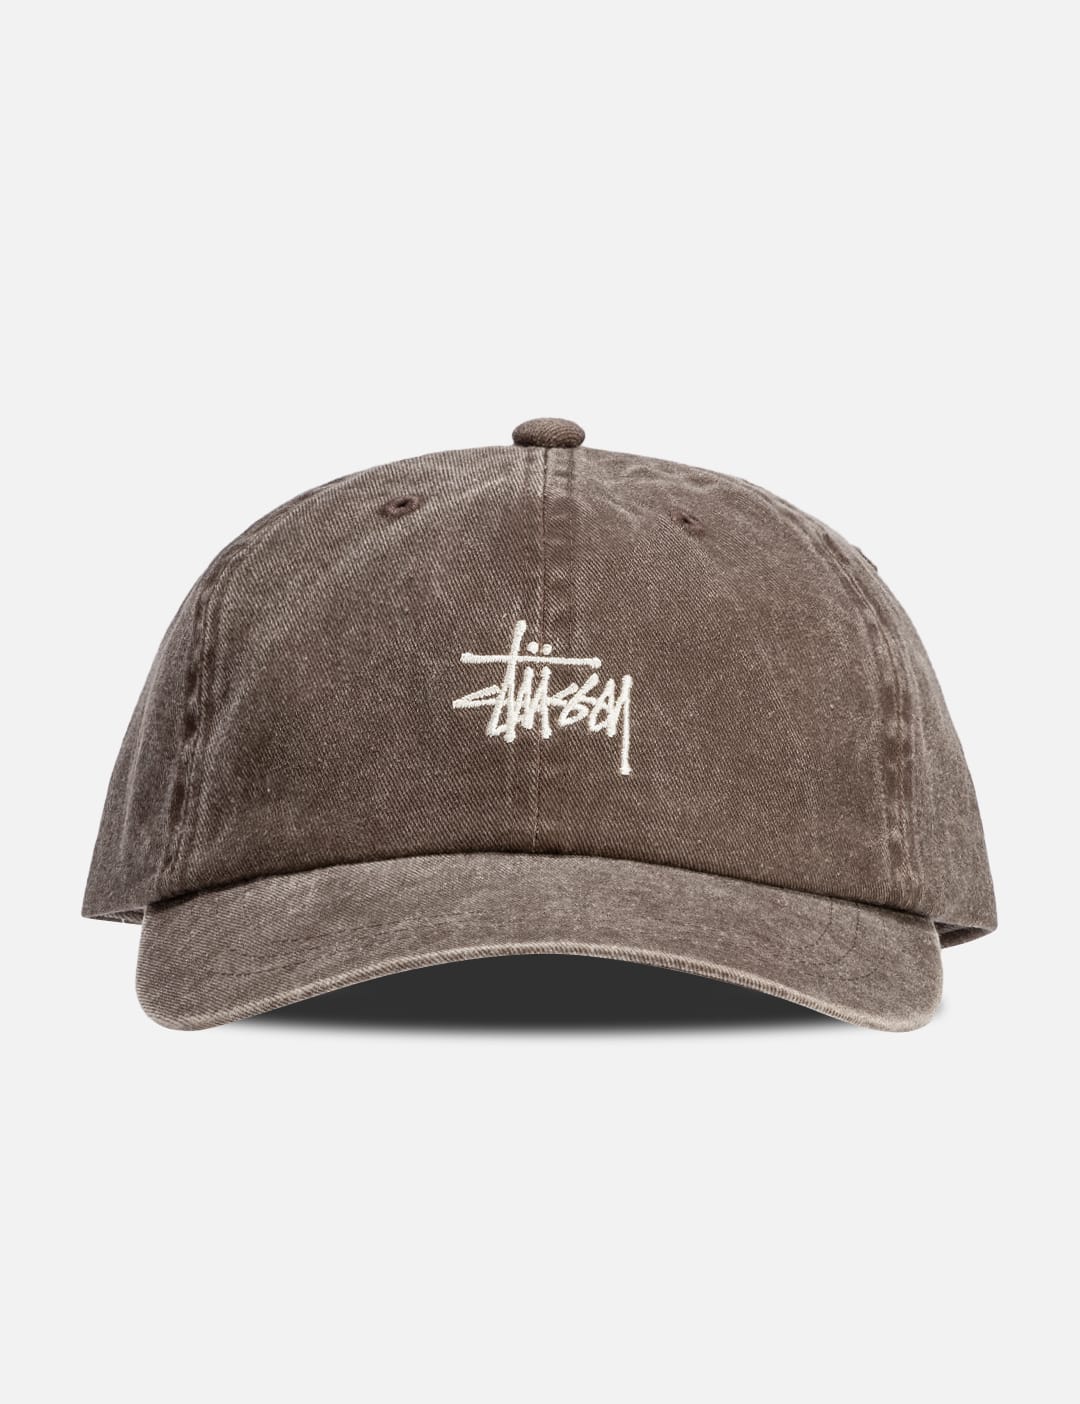 Stüssy - Basic Stock Low Pro Cap | HBX - Globally Curated Fashion